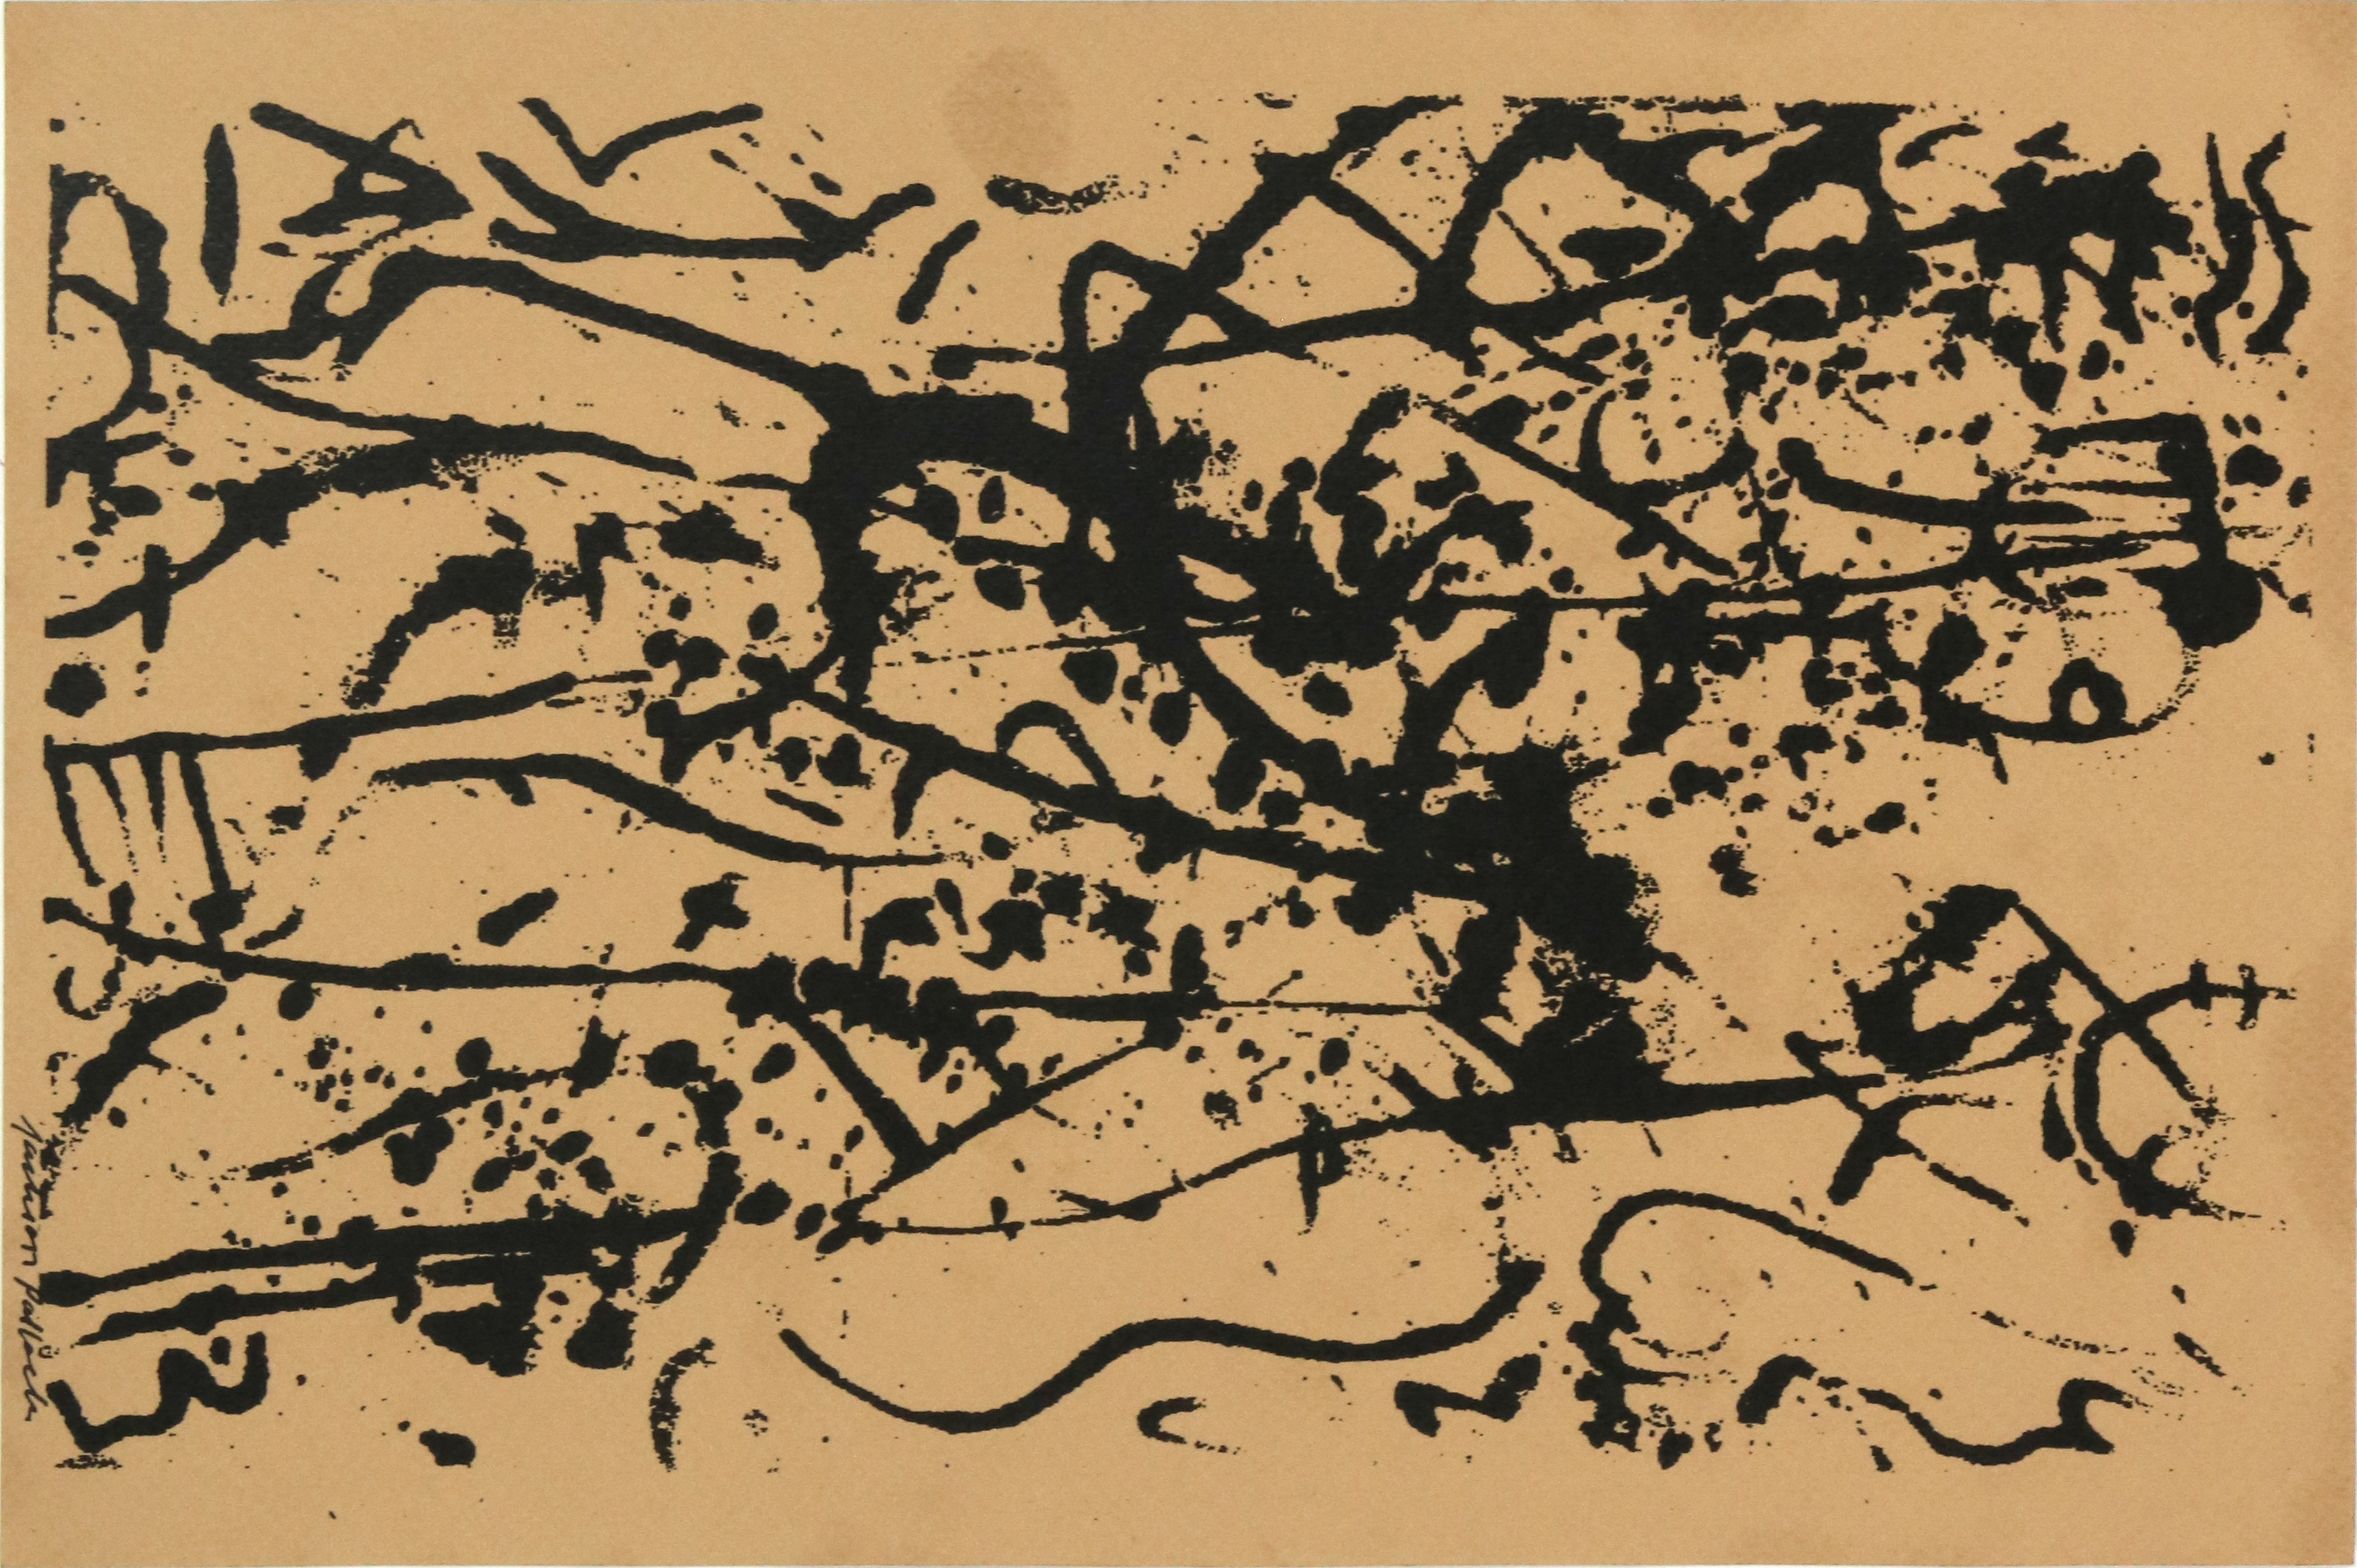 PRINT AFTER JACKSON POLLOCK After 3a4ed1